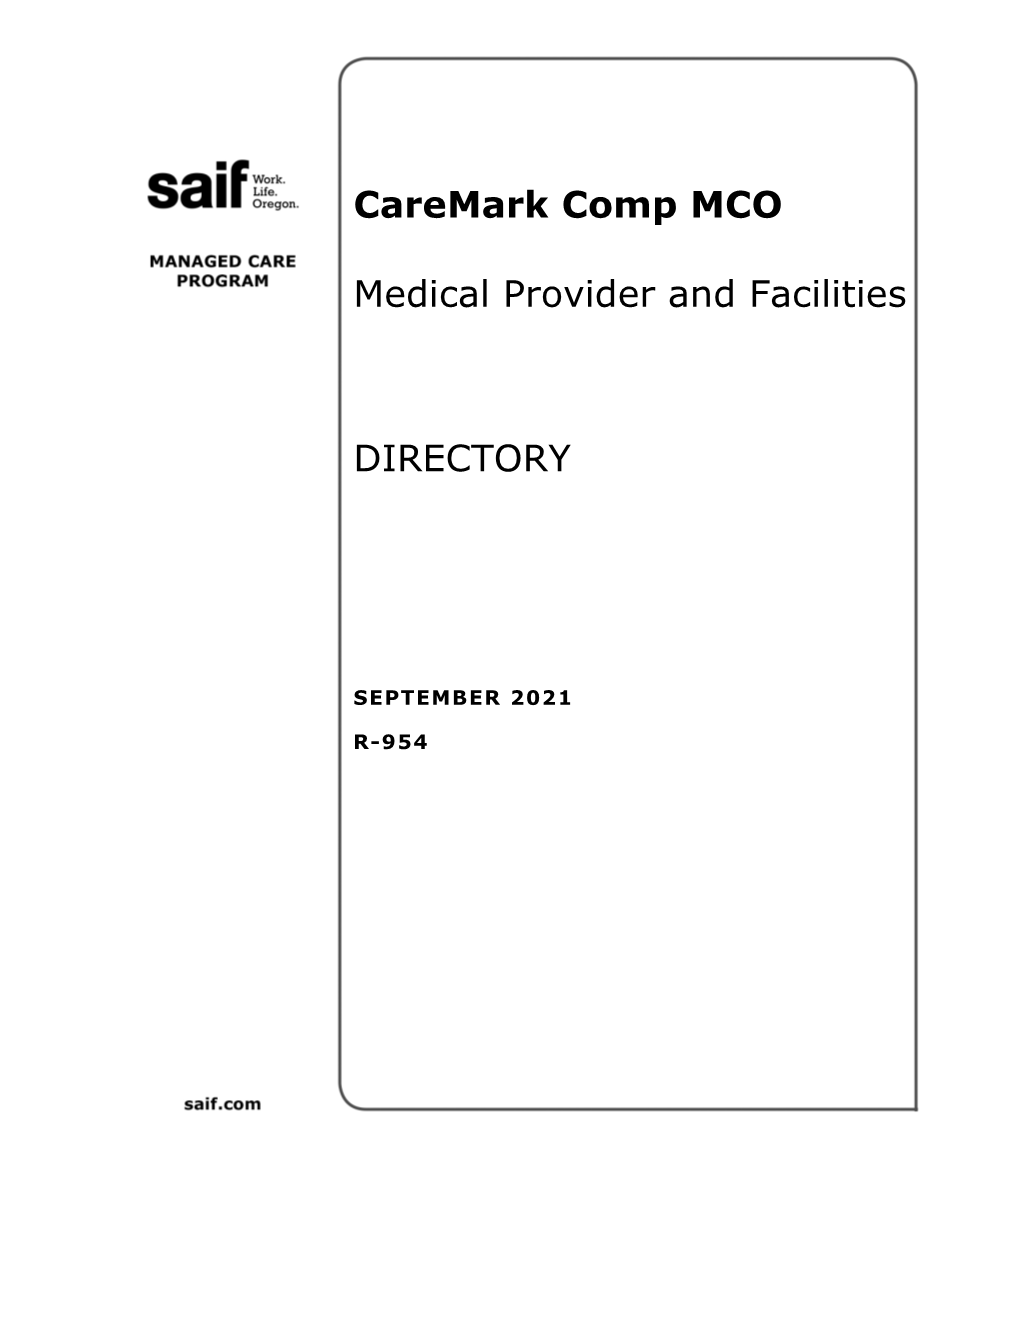 Caremark Comp MCO Medical Provider and Facilities